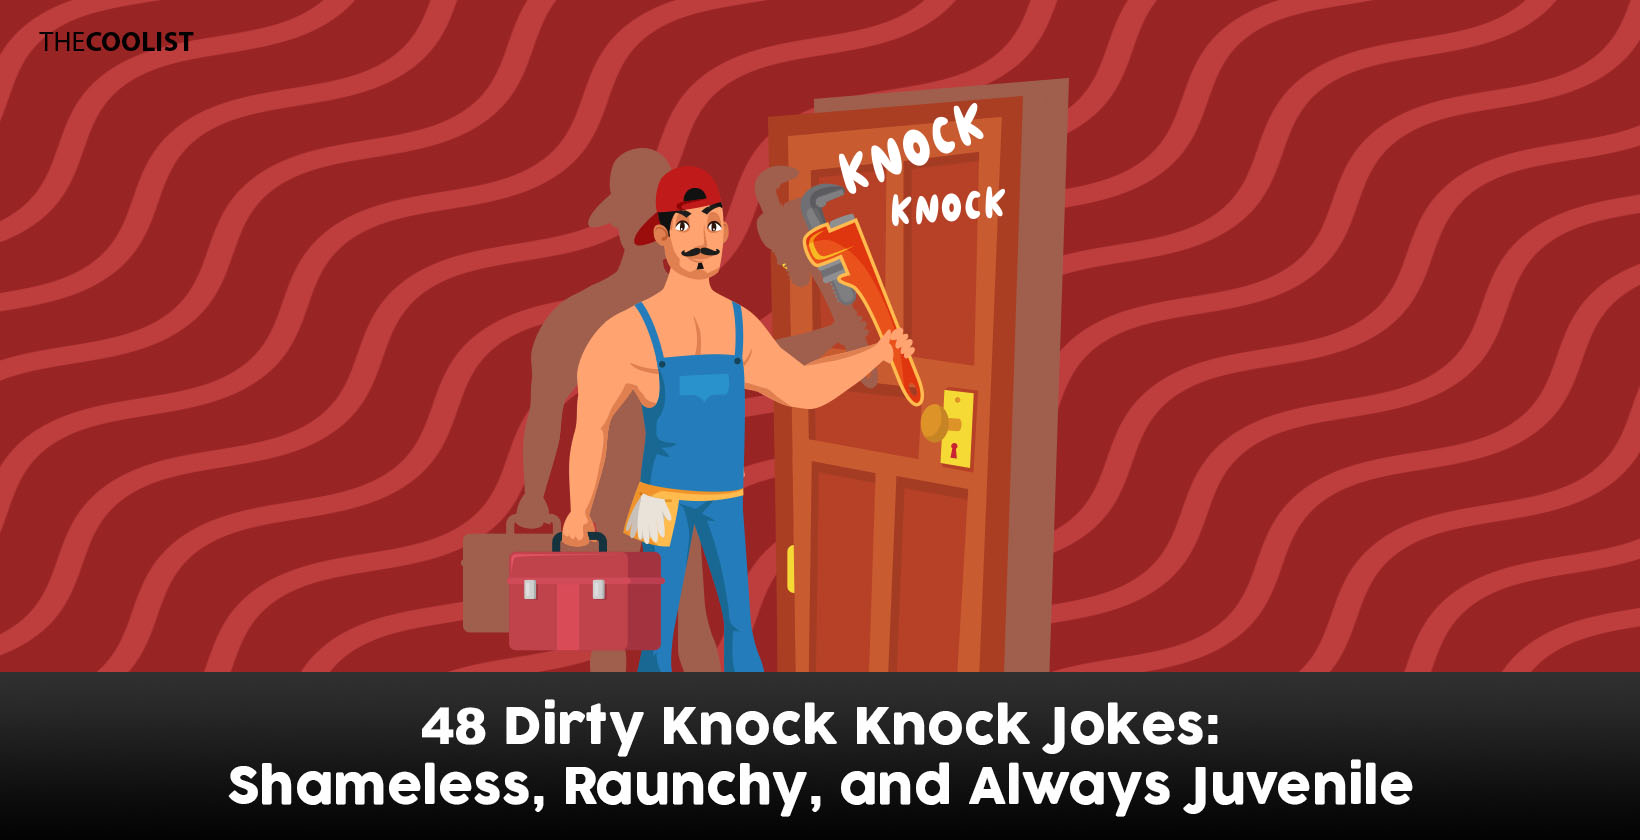 diana wijayanti recommends really dirty knock knock jokes pic